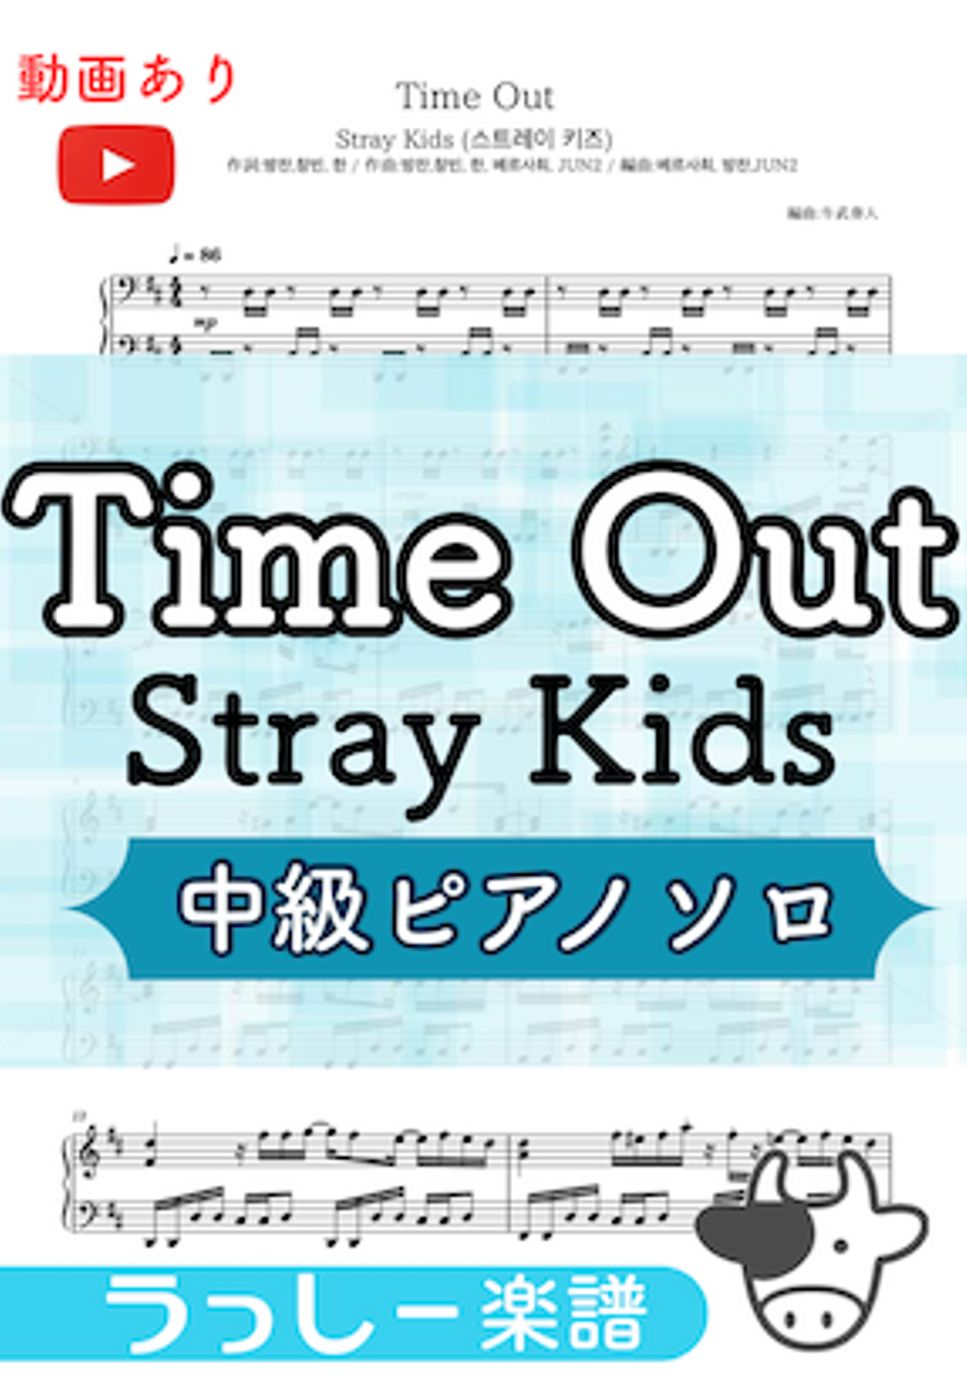 Stray Kids - Time Out (ピアノソロ/Stray Kids/スキズ) by 牛武奏人